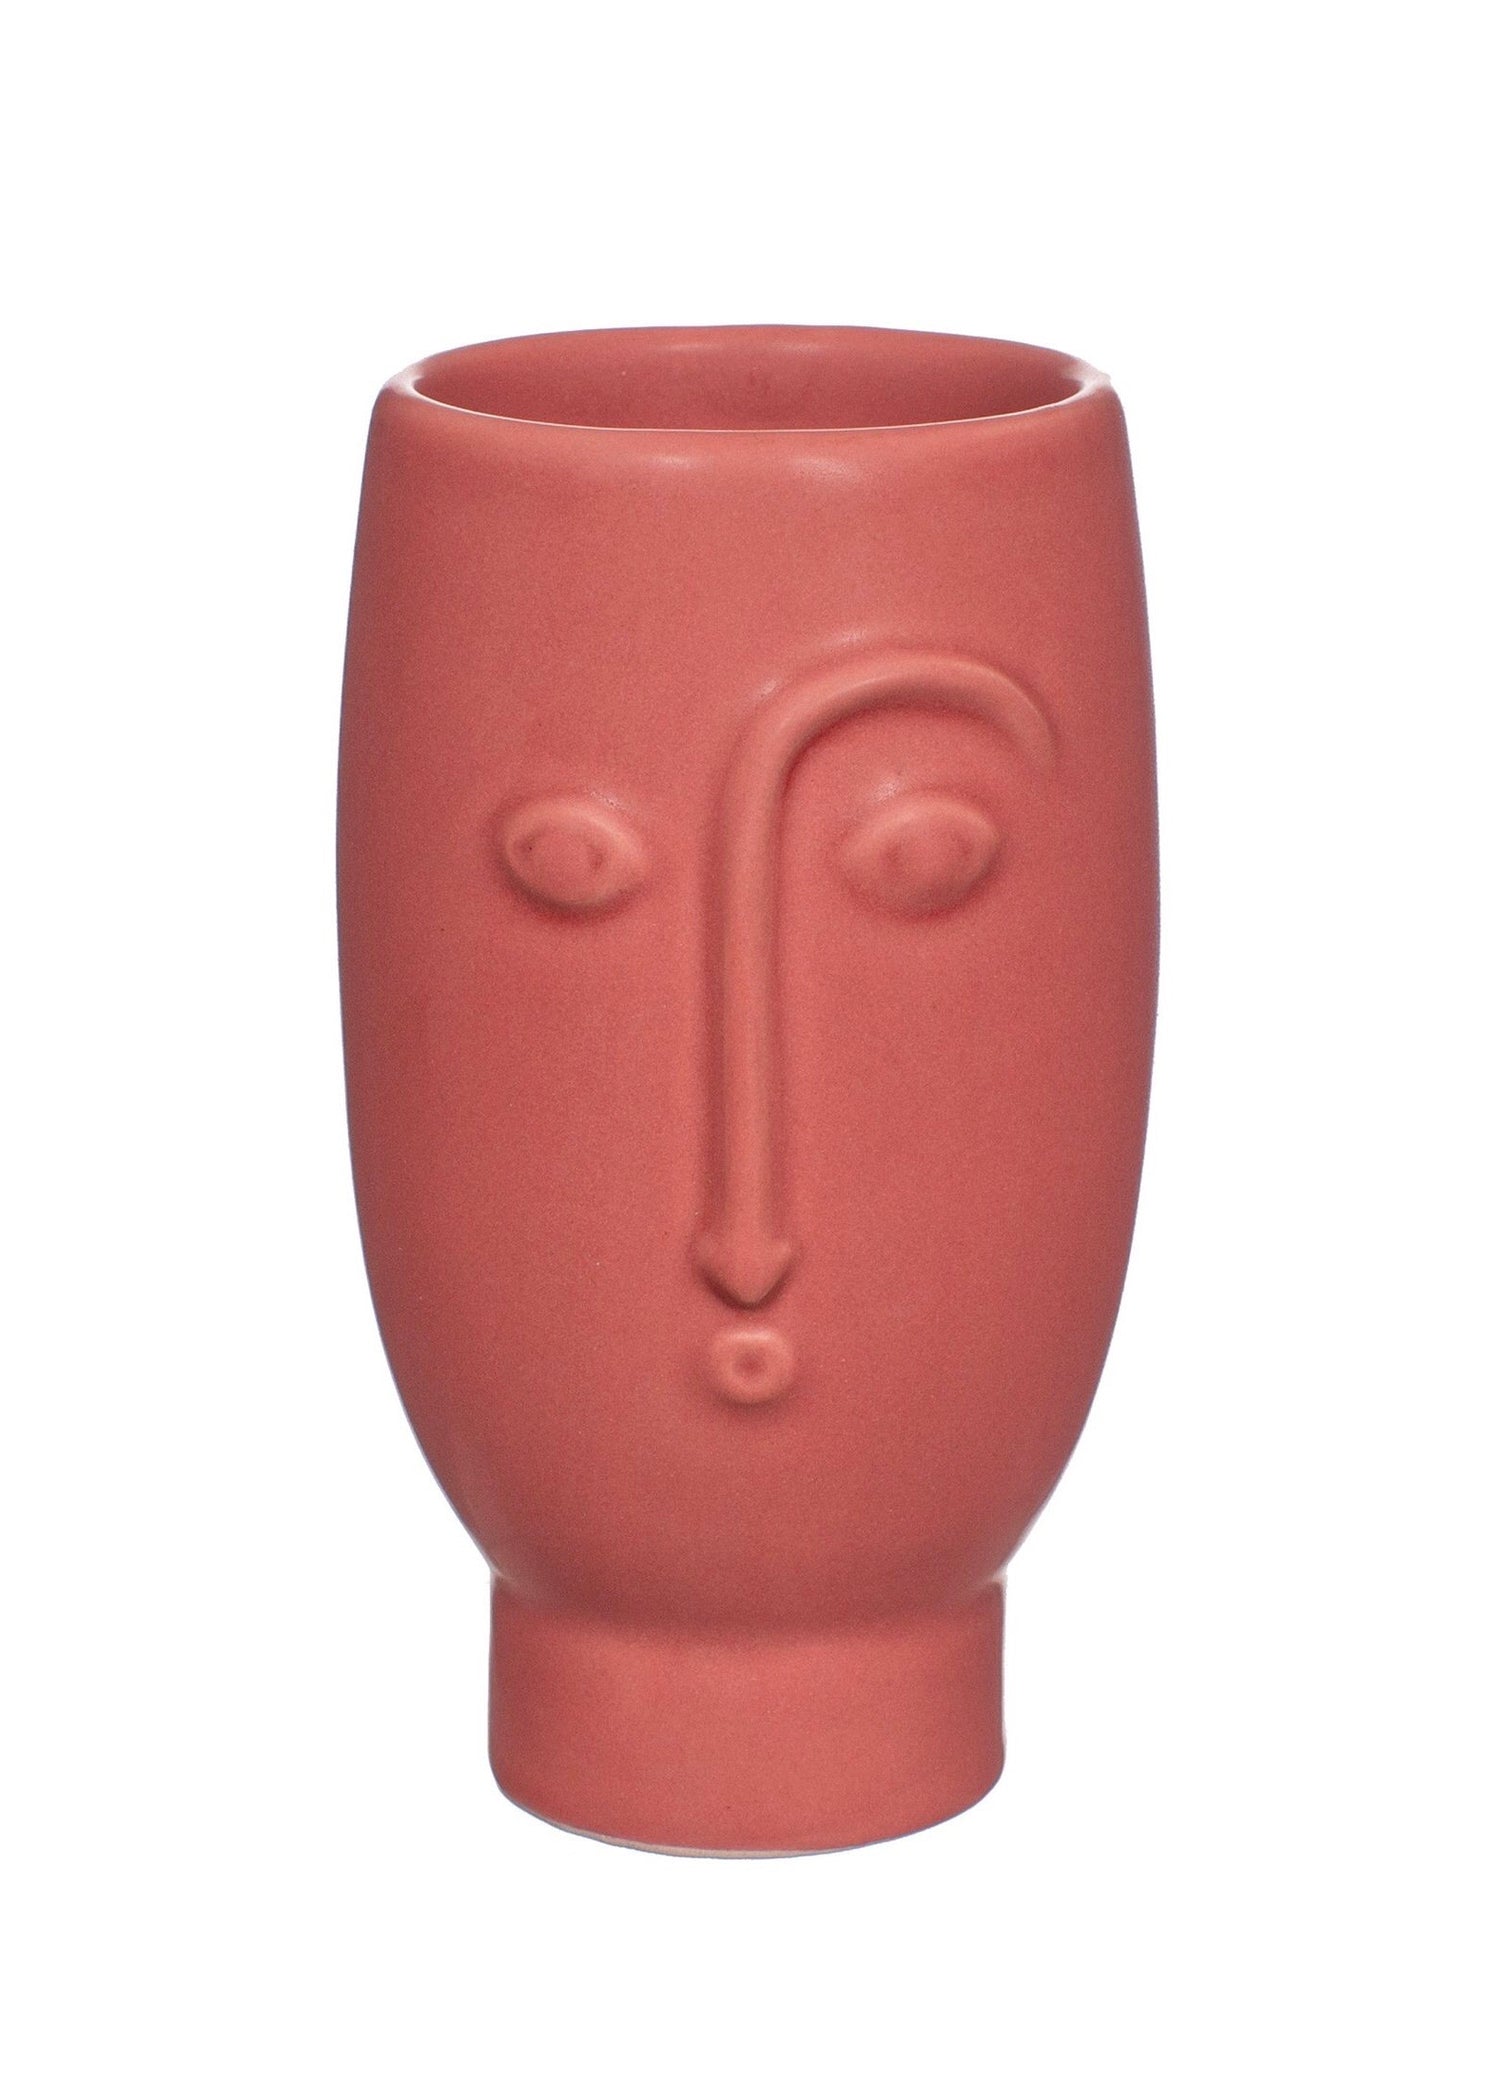 Matt red vase with face detailing 